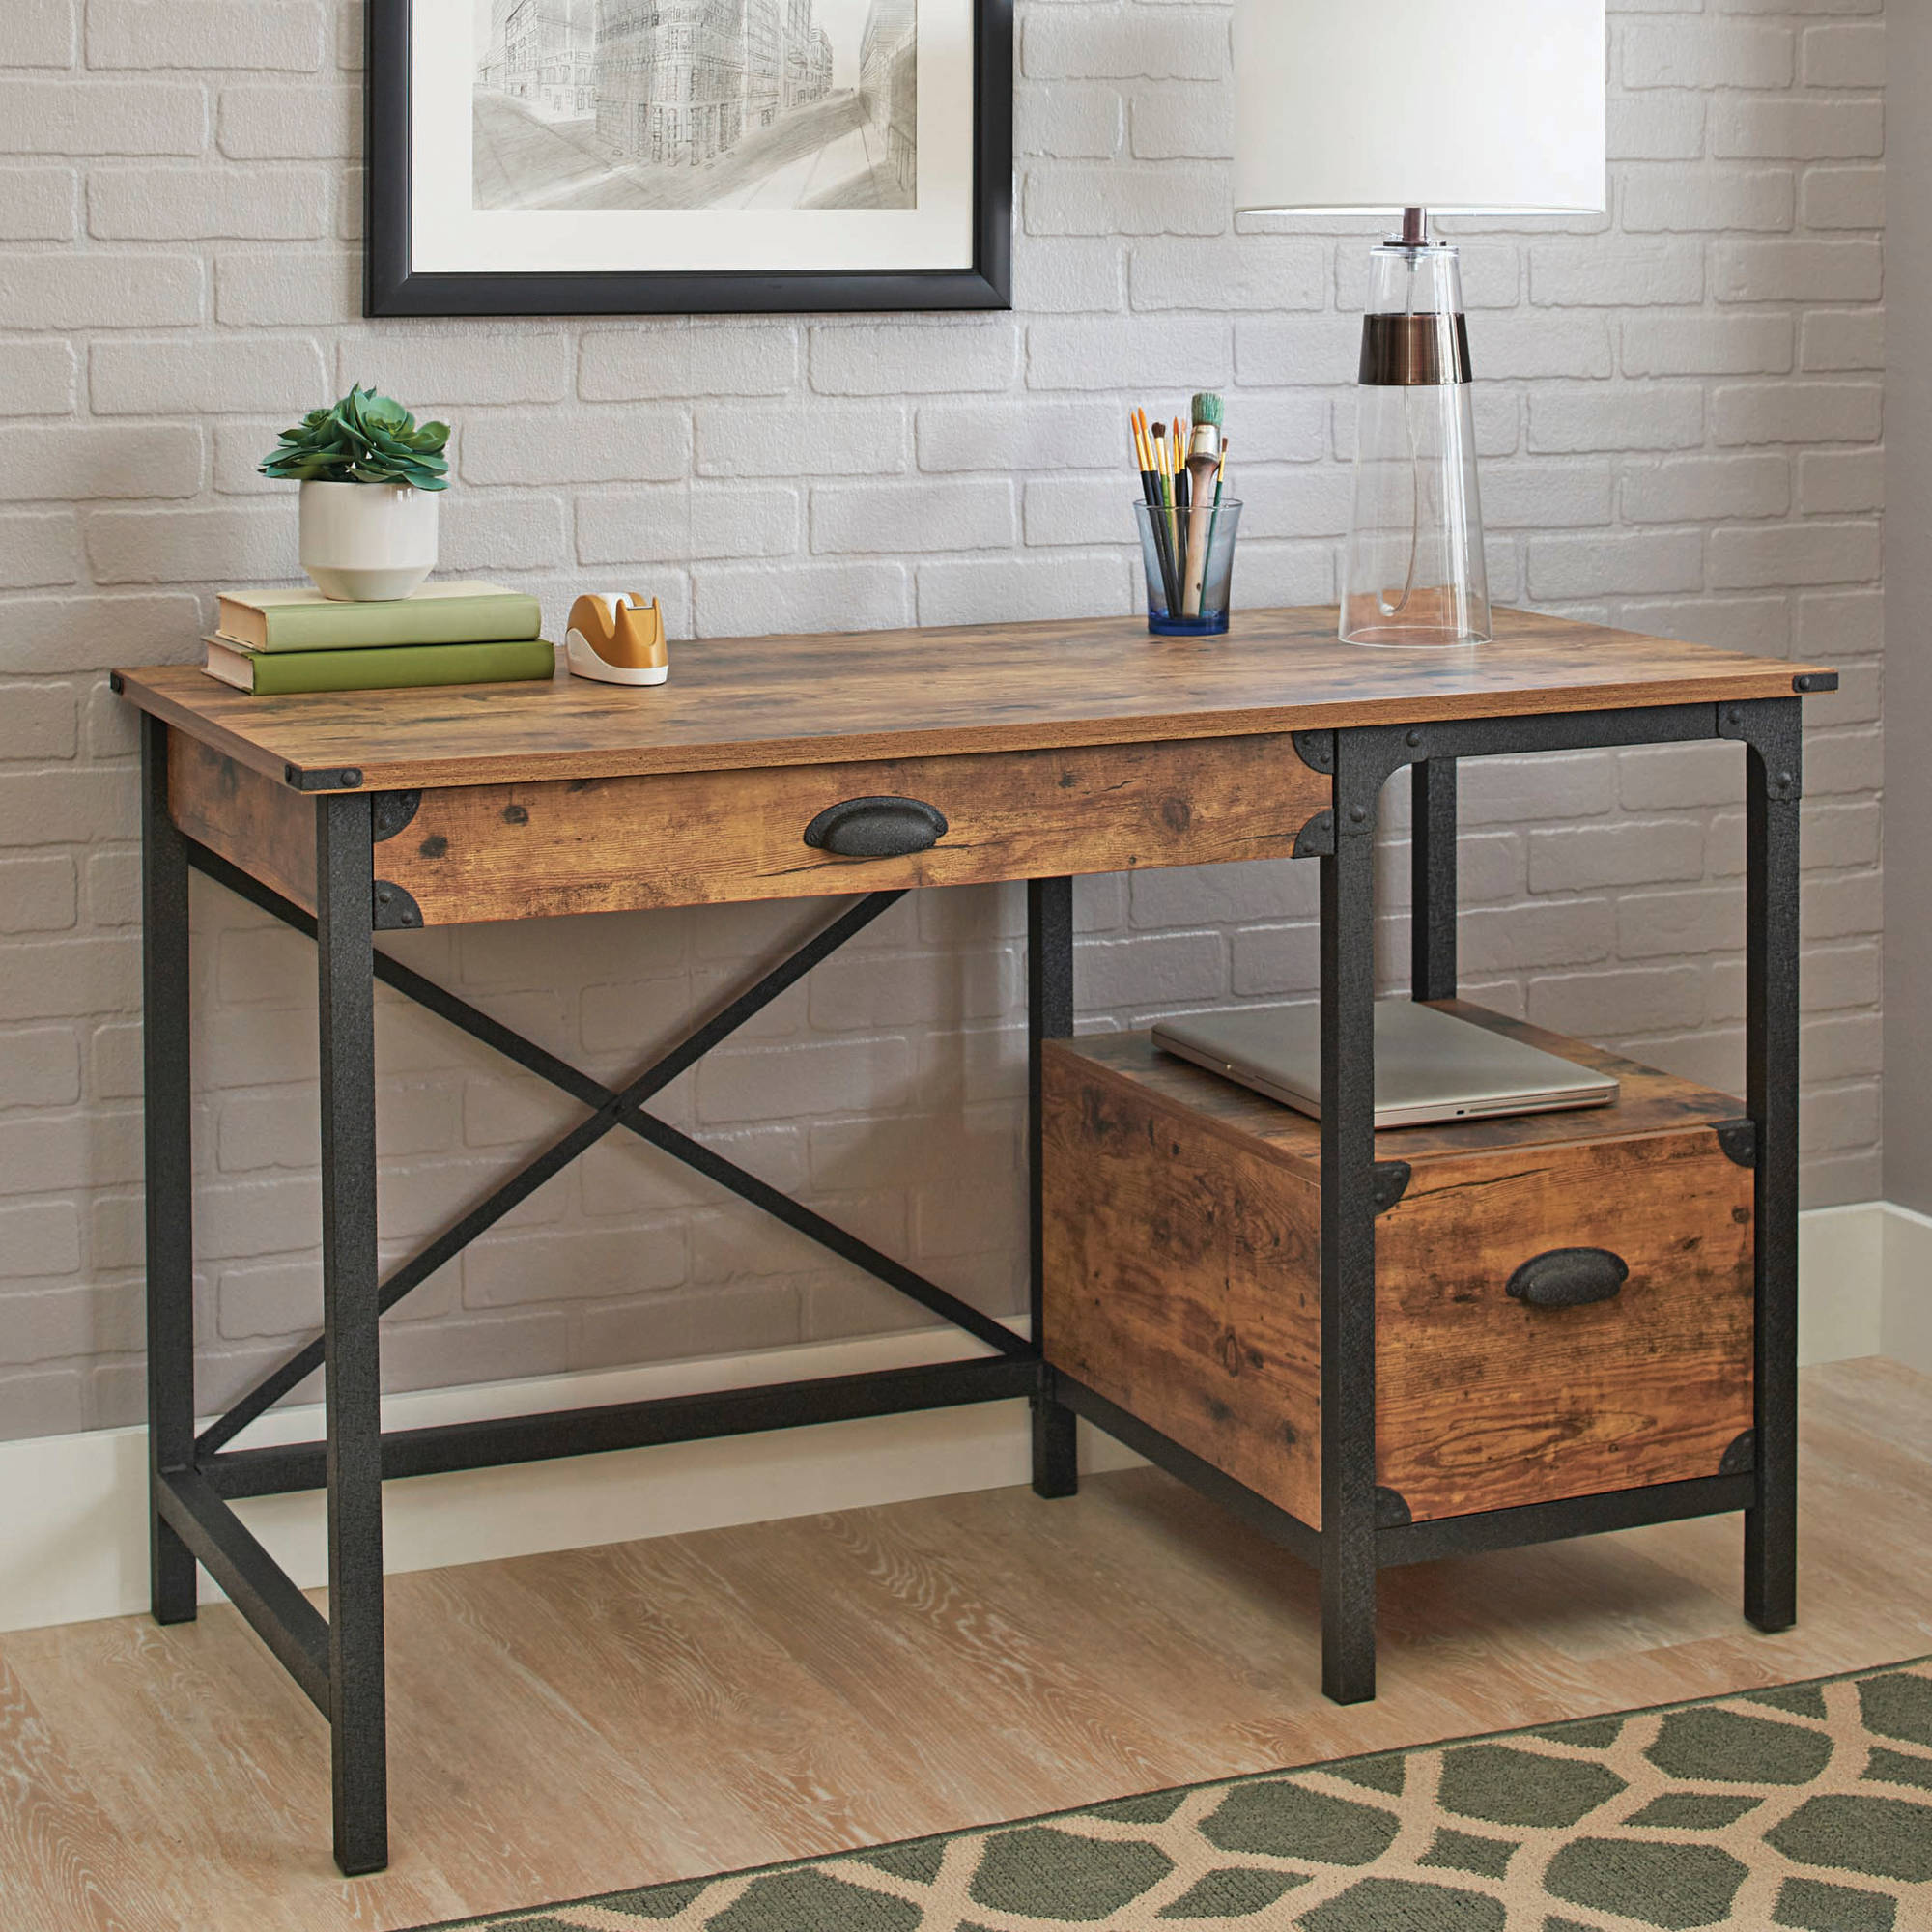 Better Homes &amp; Gardens Rustic Country, Weathered Pine Finish - Walmart.com